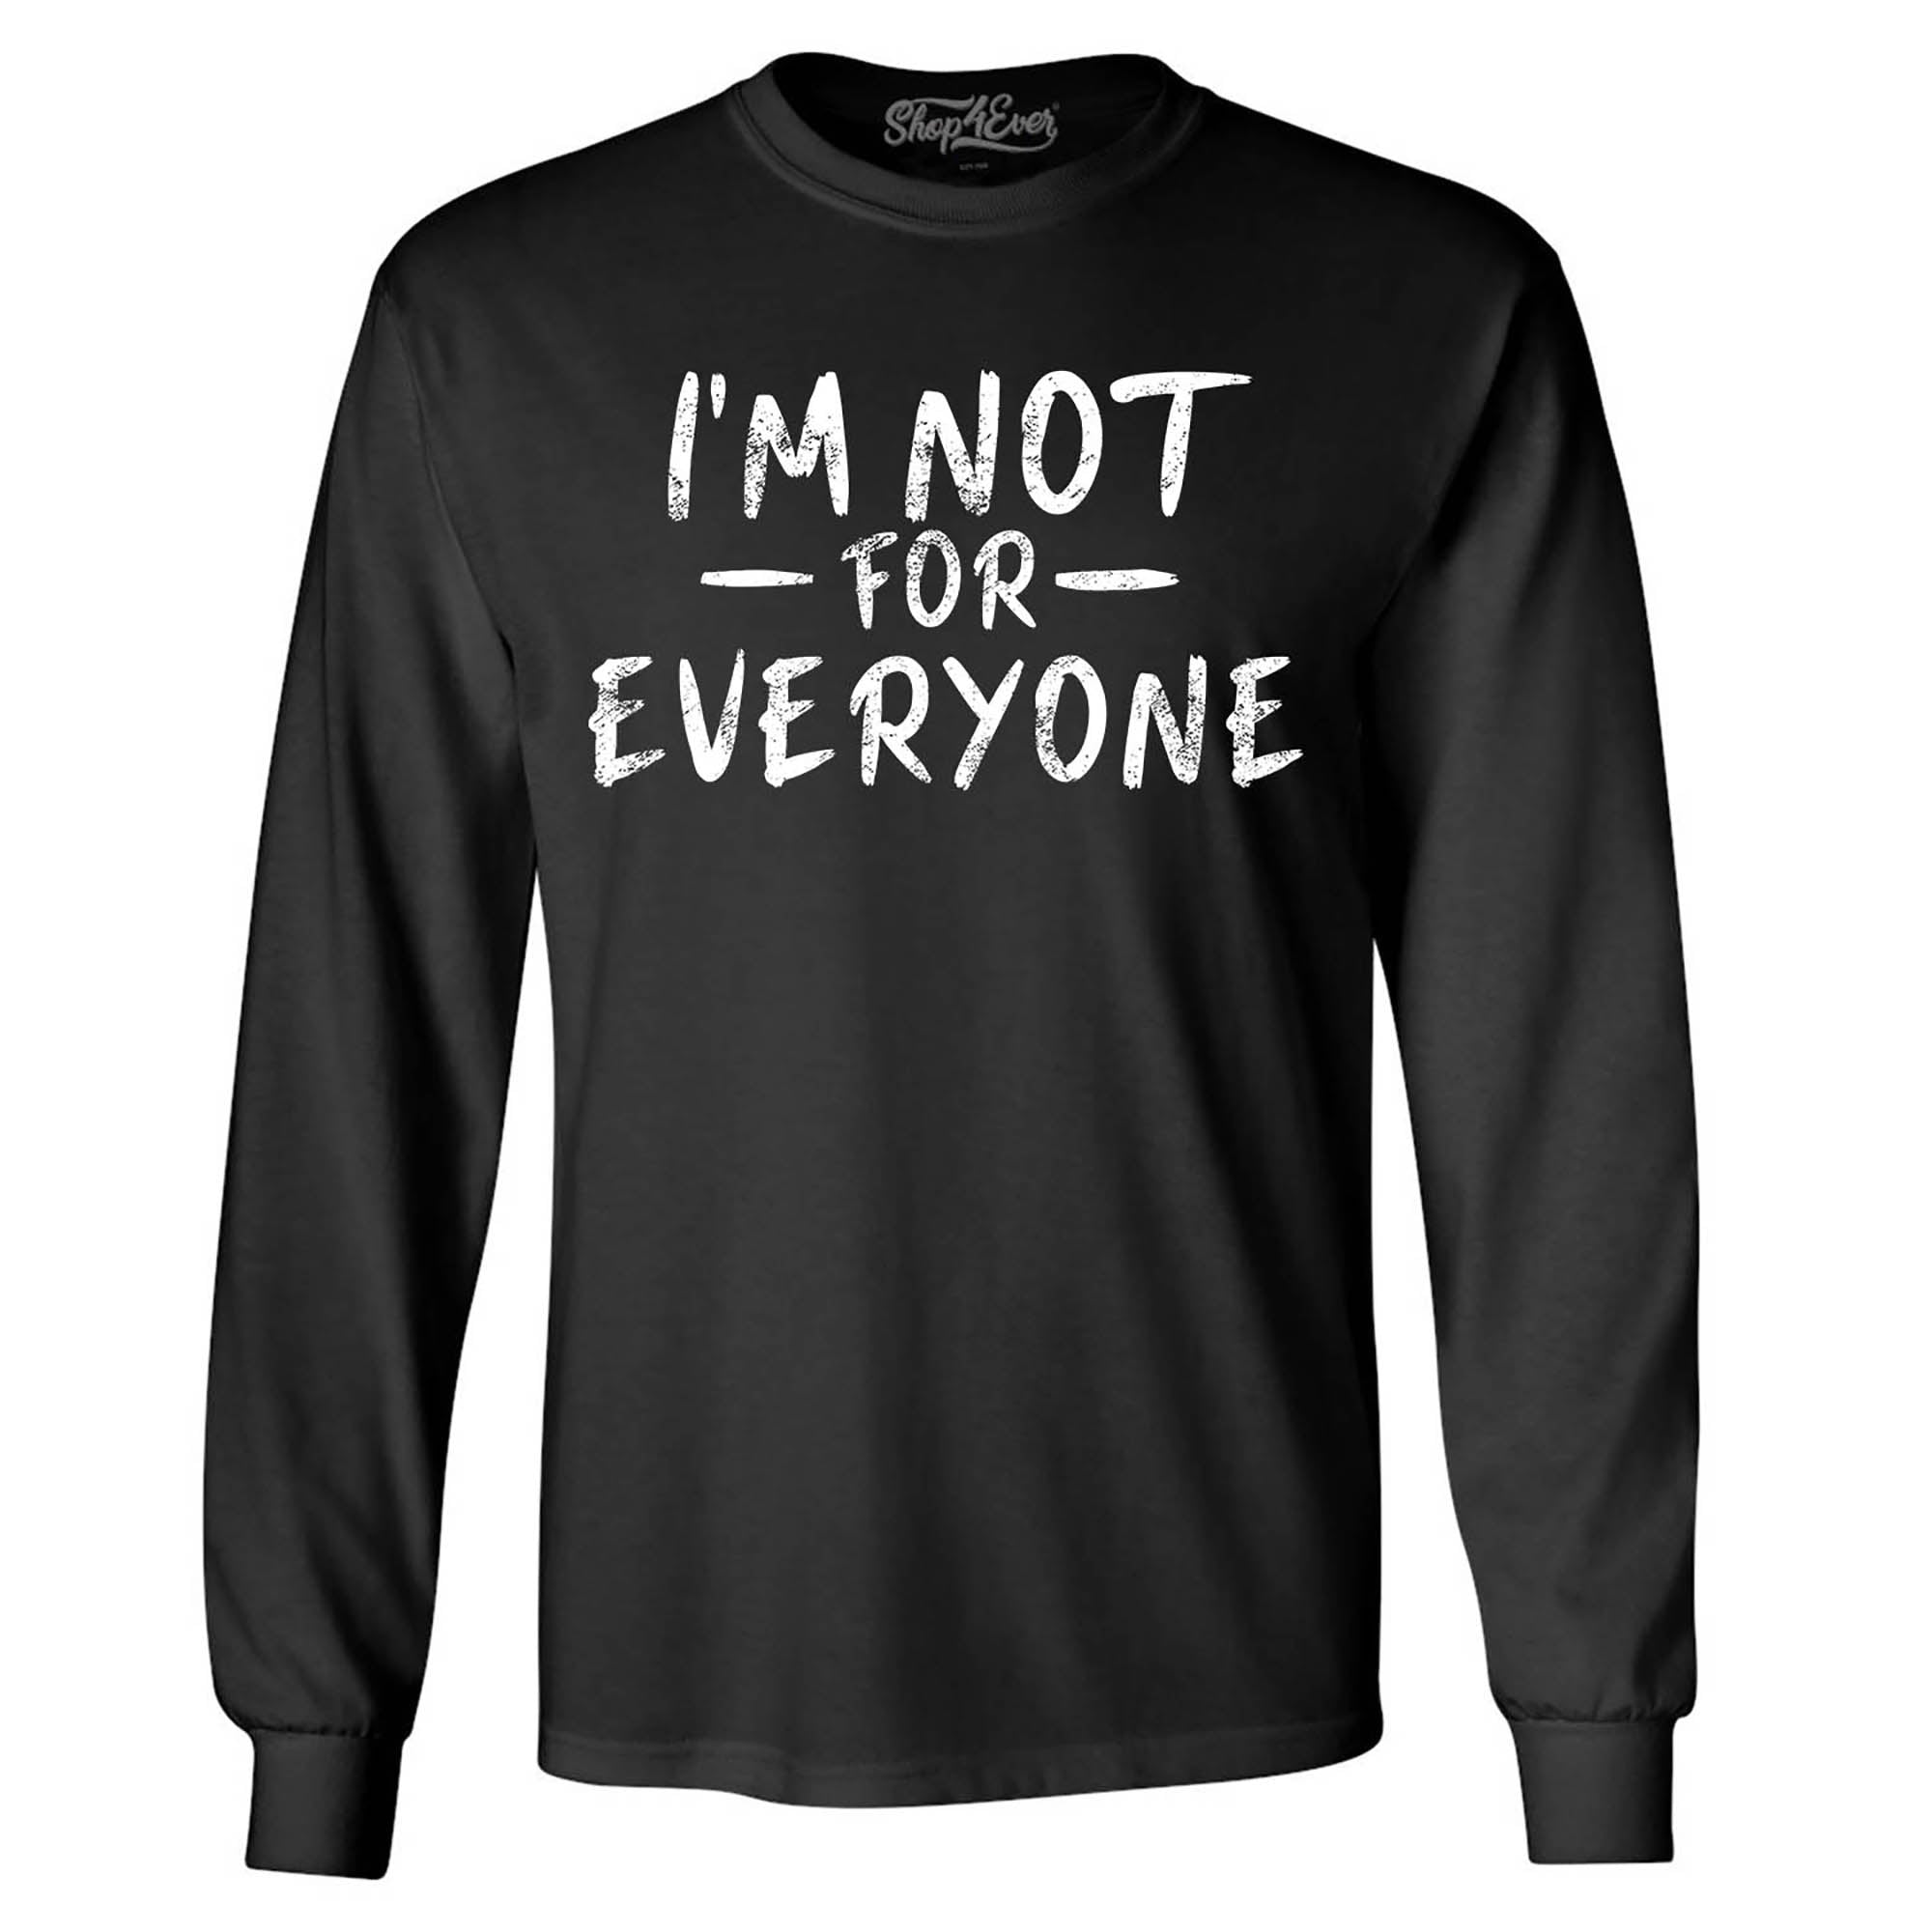 I'm Not for Everyone Funny Long Sleeve Shirt